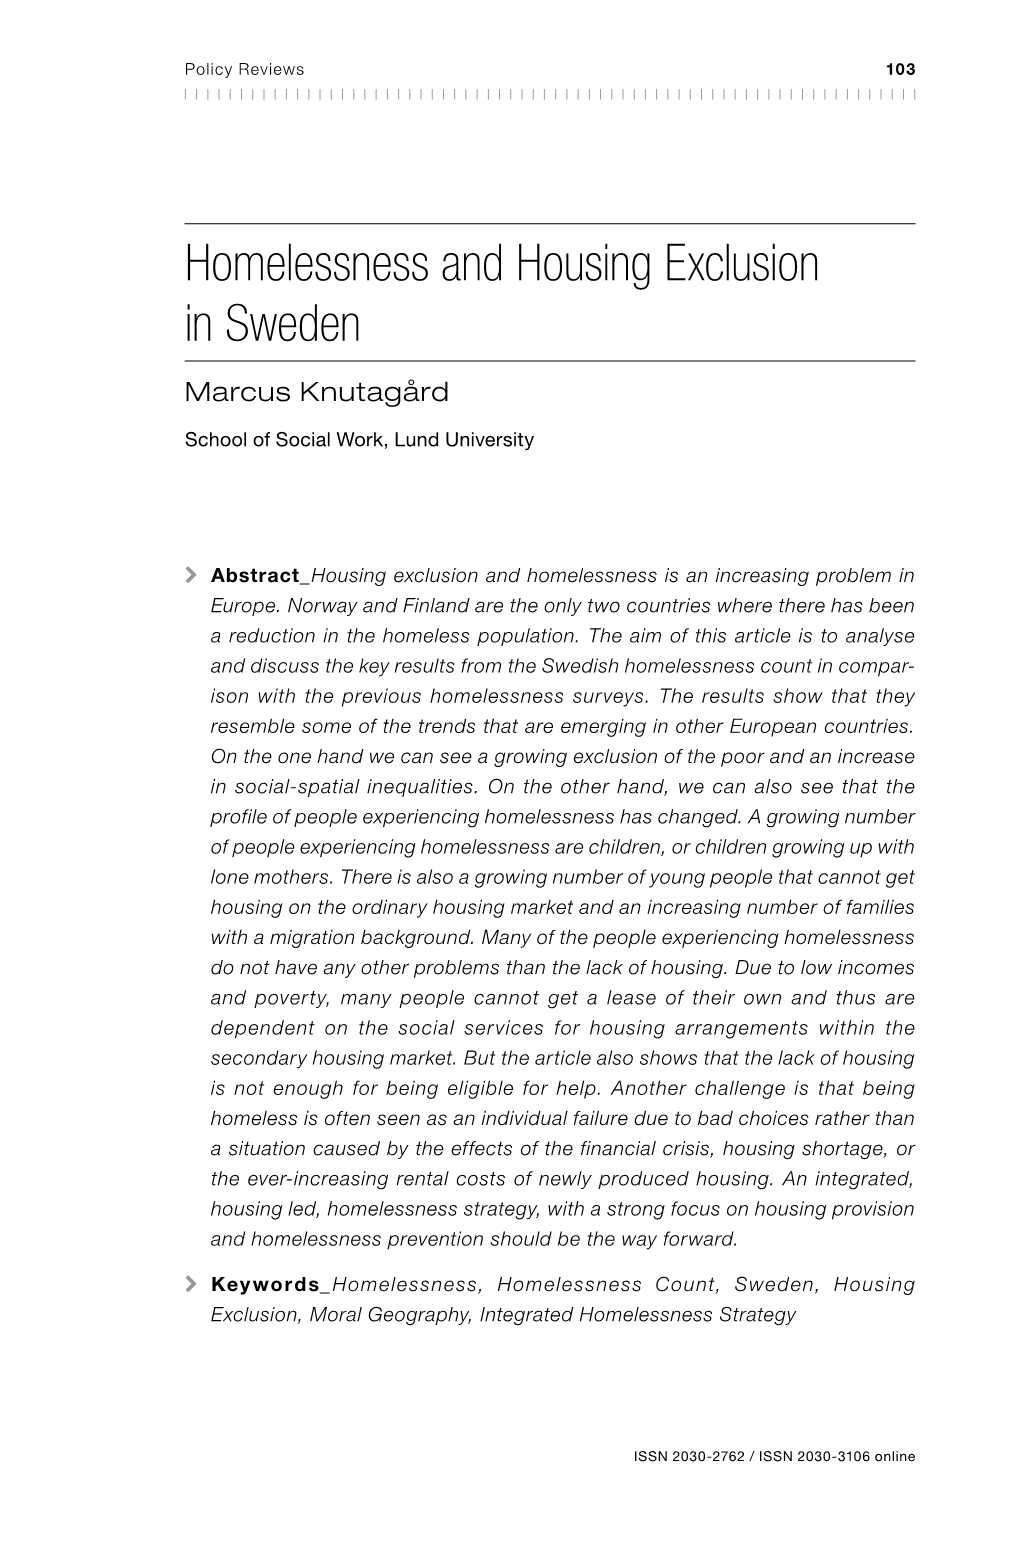 Marcus Knutagård: Homelessness and Housing Exclusion in Sweden